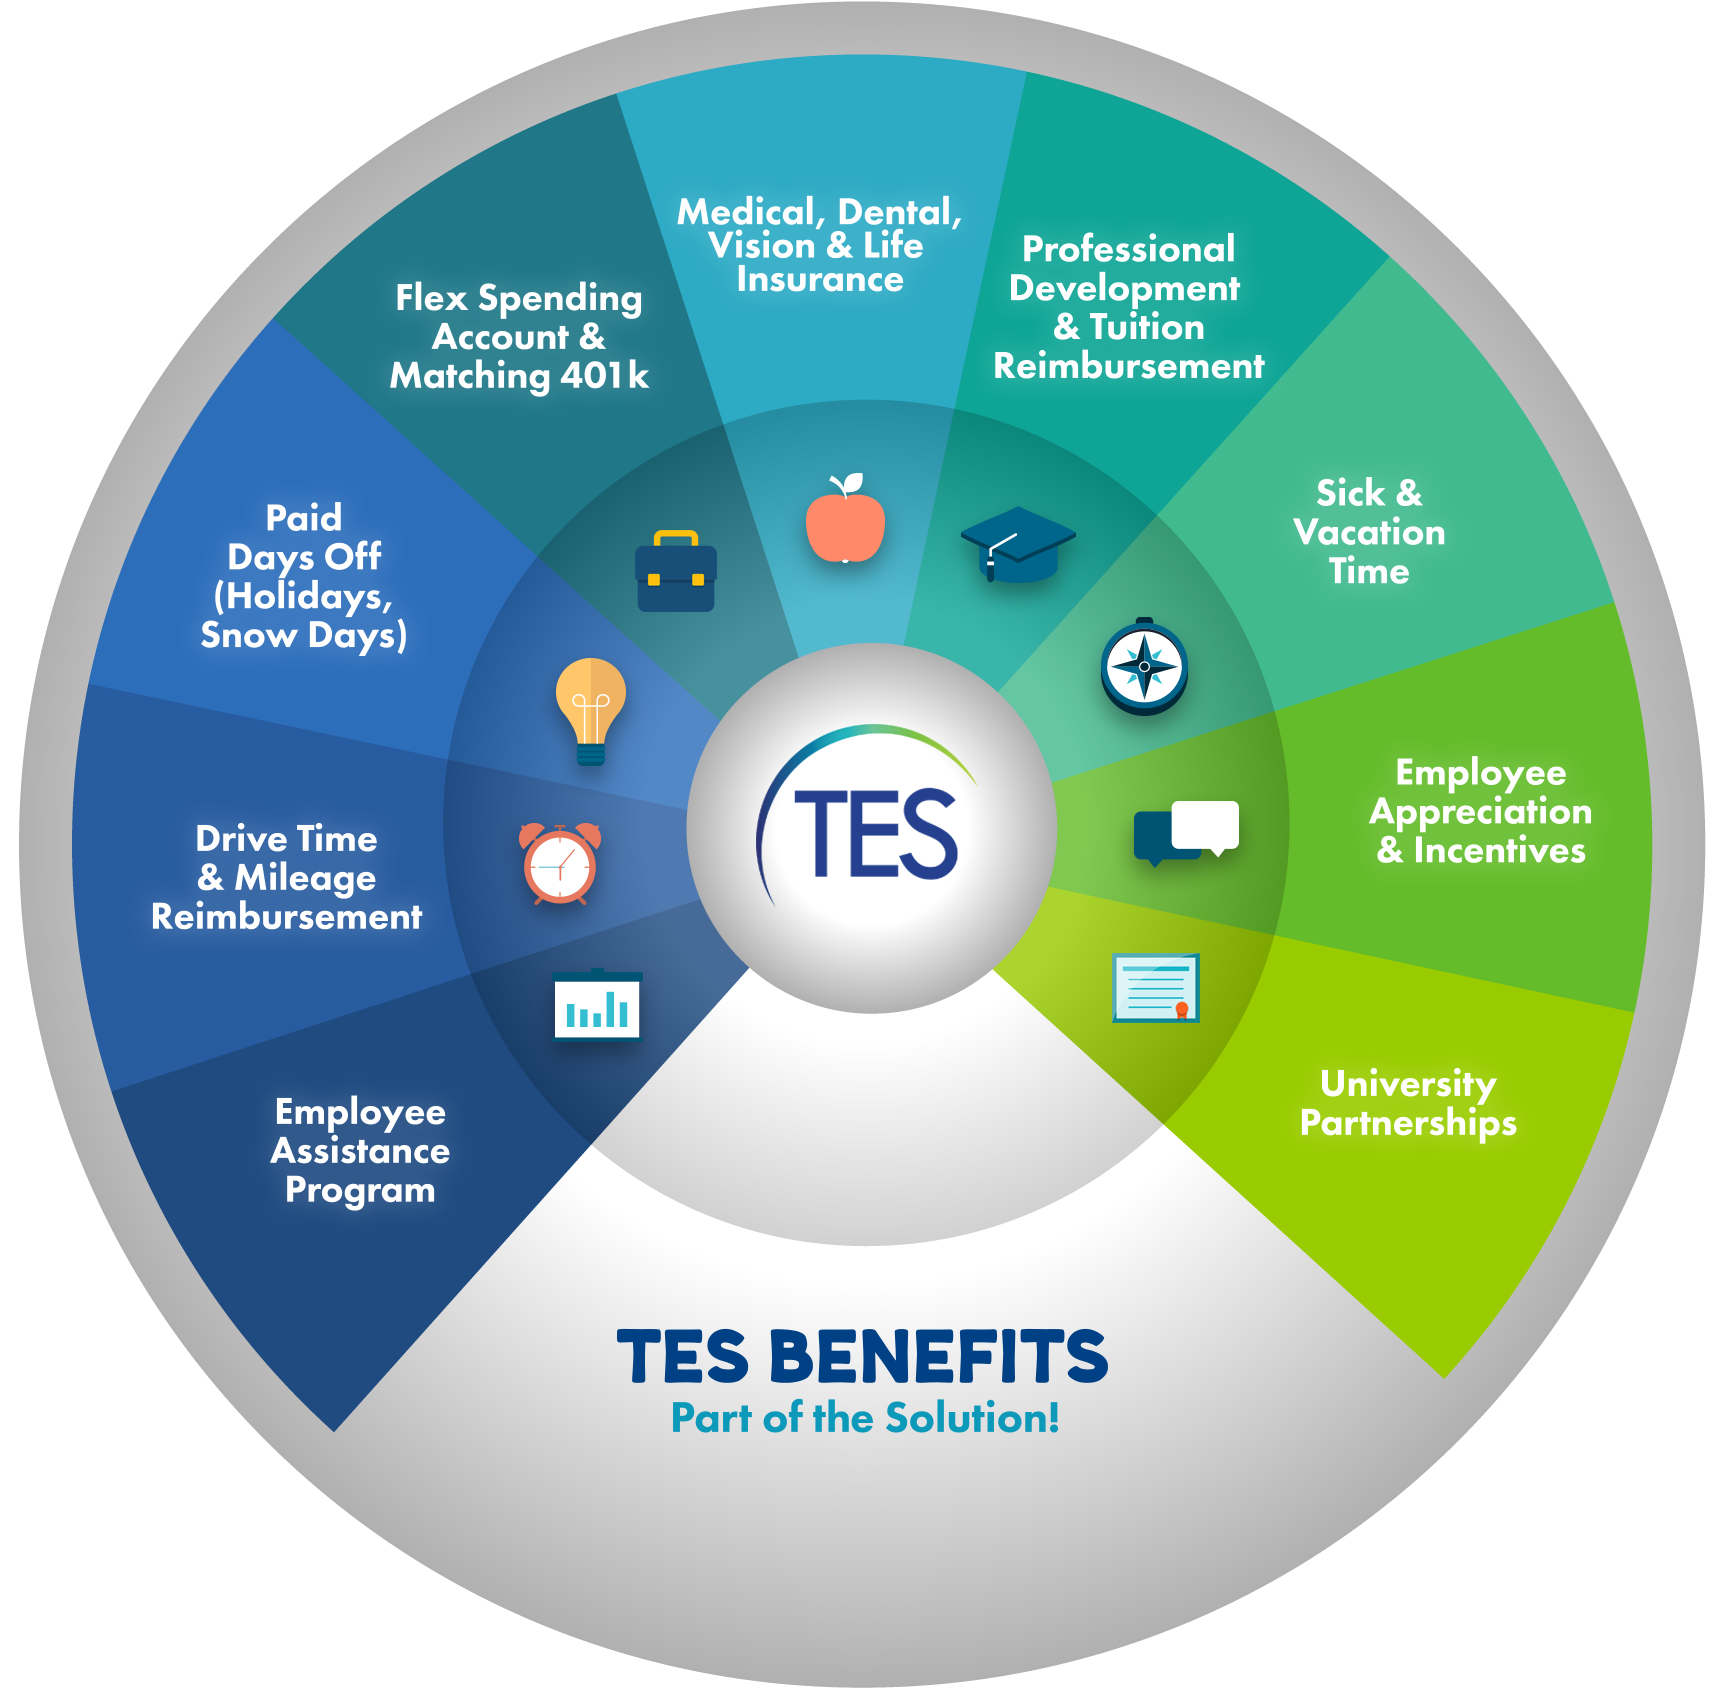 TES Benefits and Opportunities